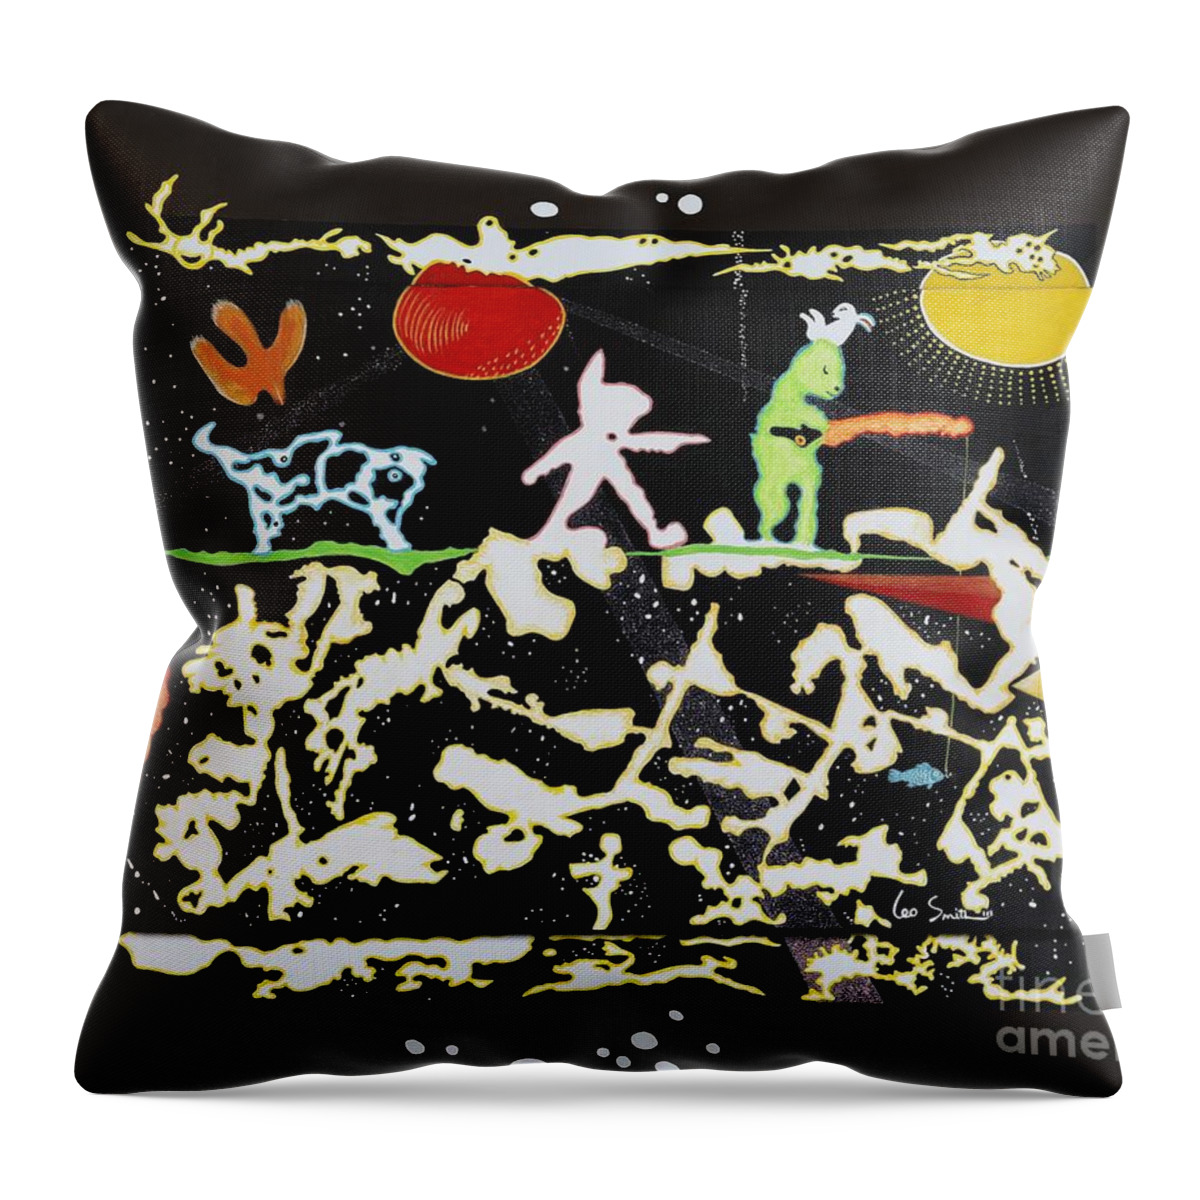 Leo Smith Throw Pillow featuring the painting Black Ice by Leo Smith